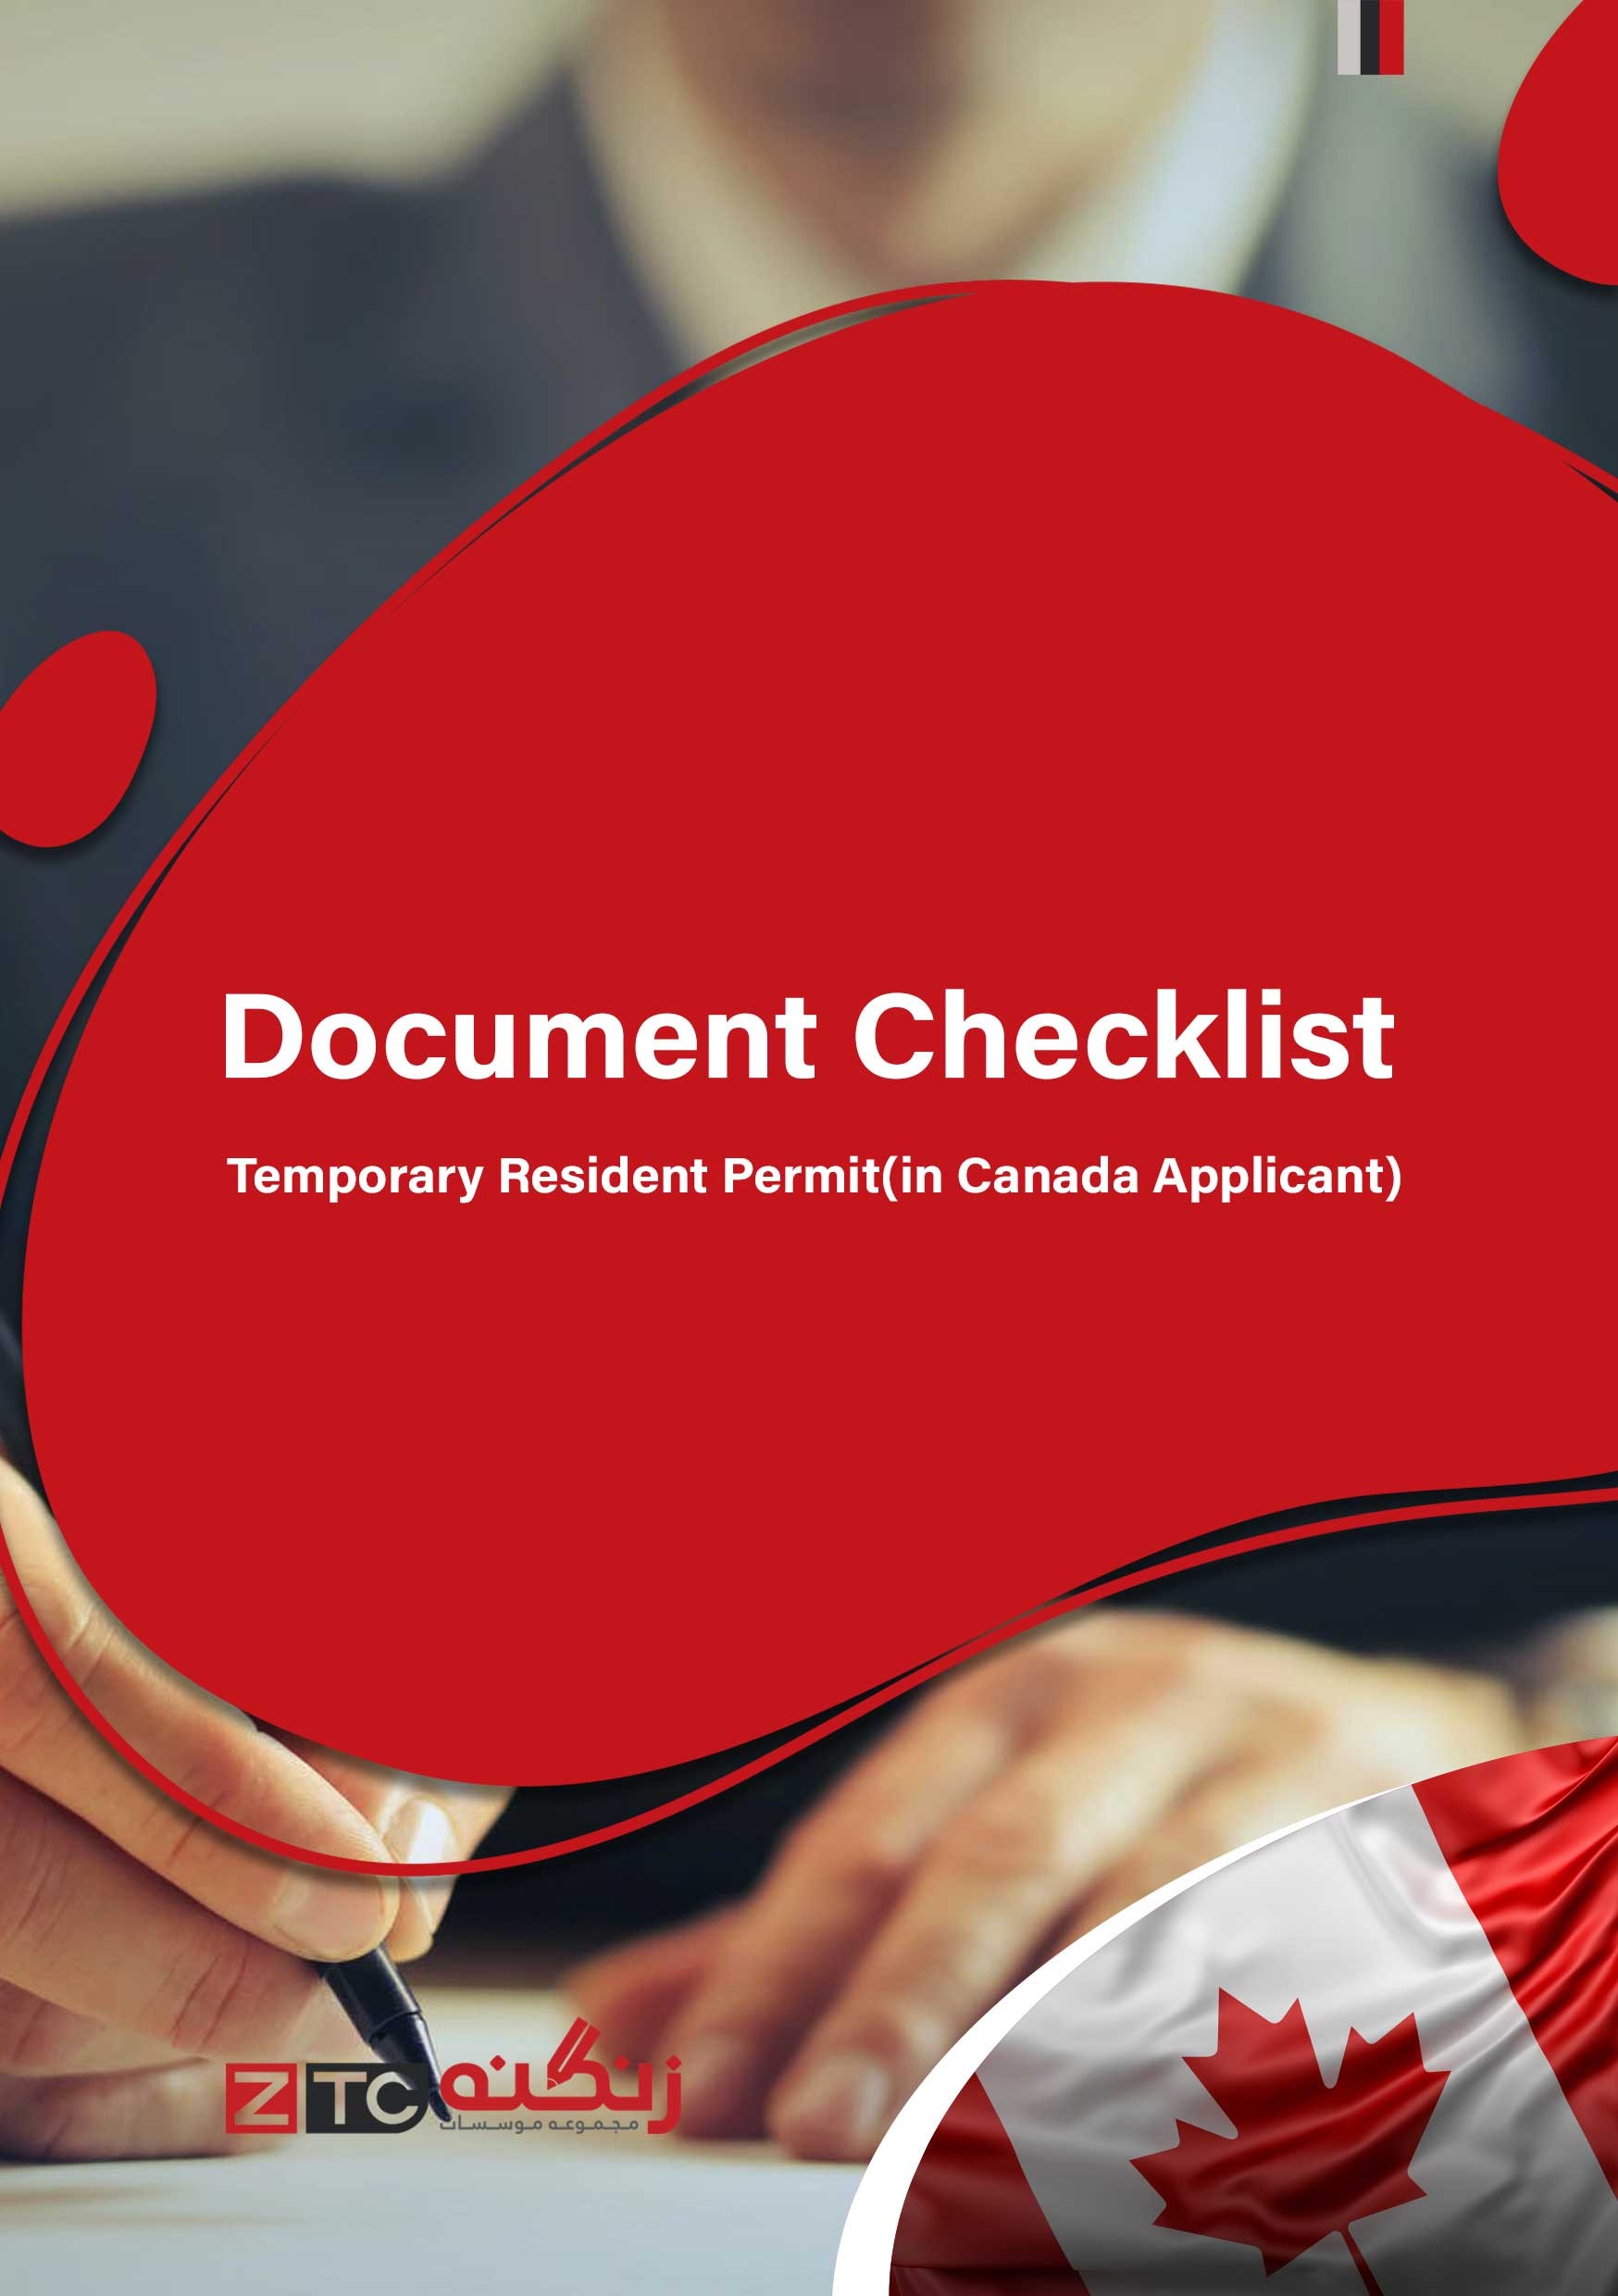 Document Checklist Temporary Resident Permit (in Canada Applicant)